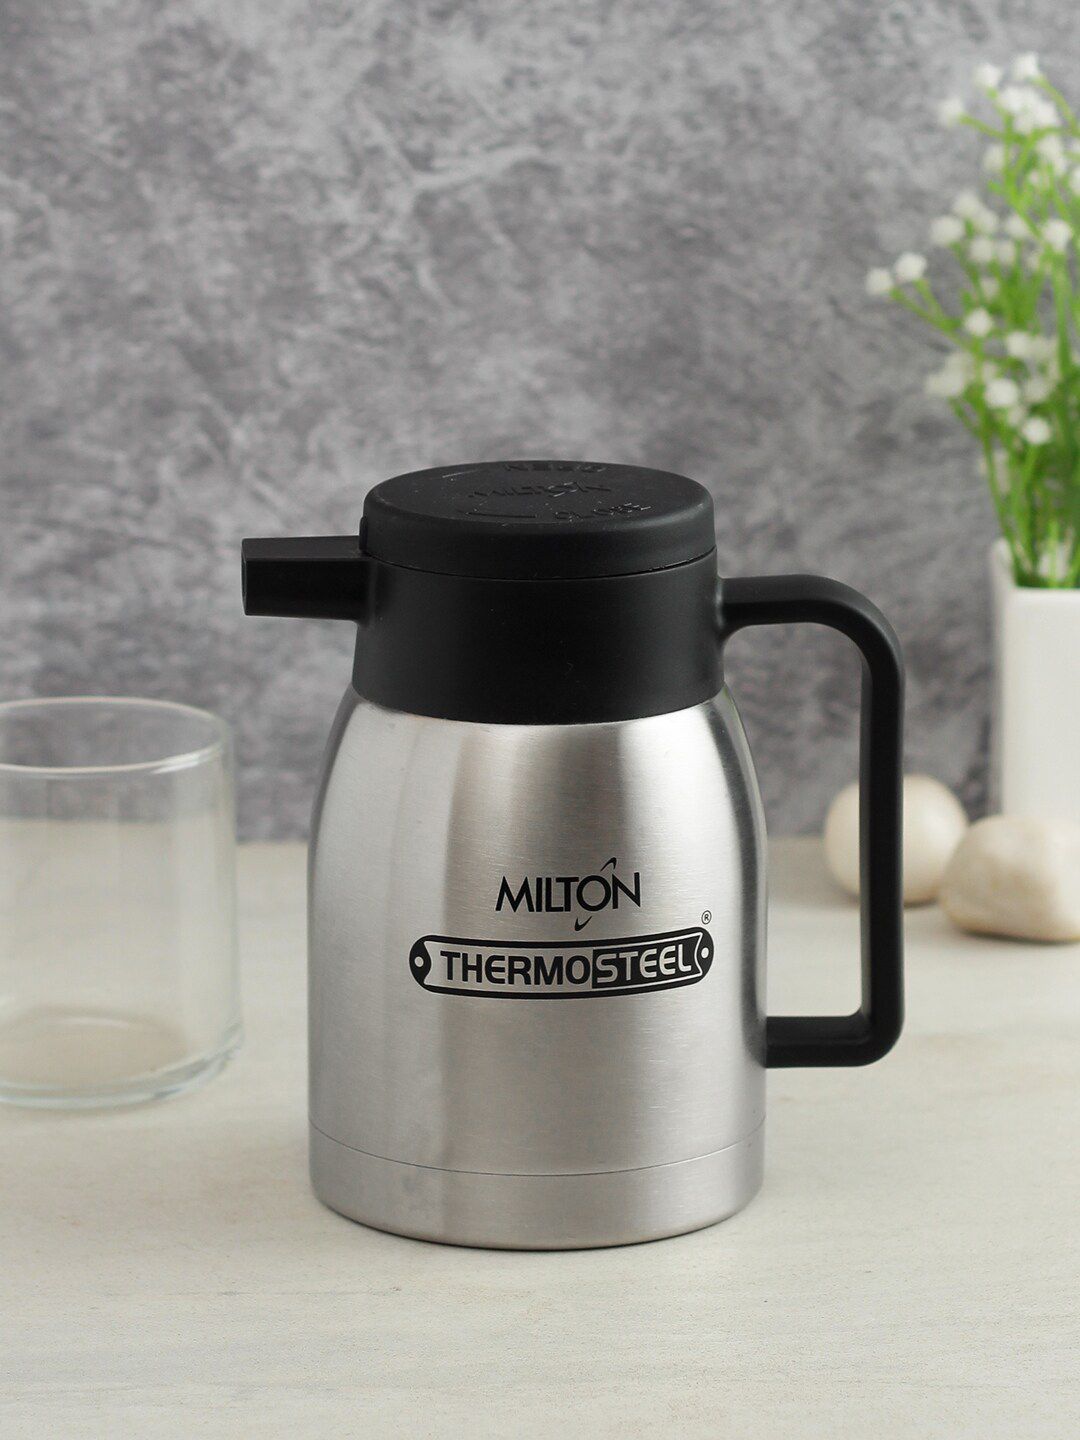 Milton Silver-Toned & Black Stainless Steel Coffee Kettle 350 ml Price in India